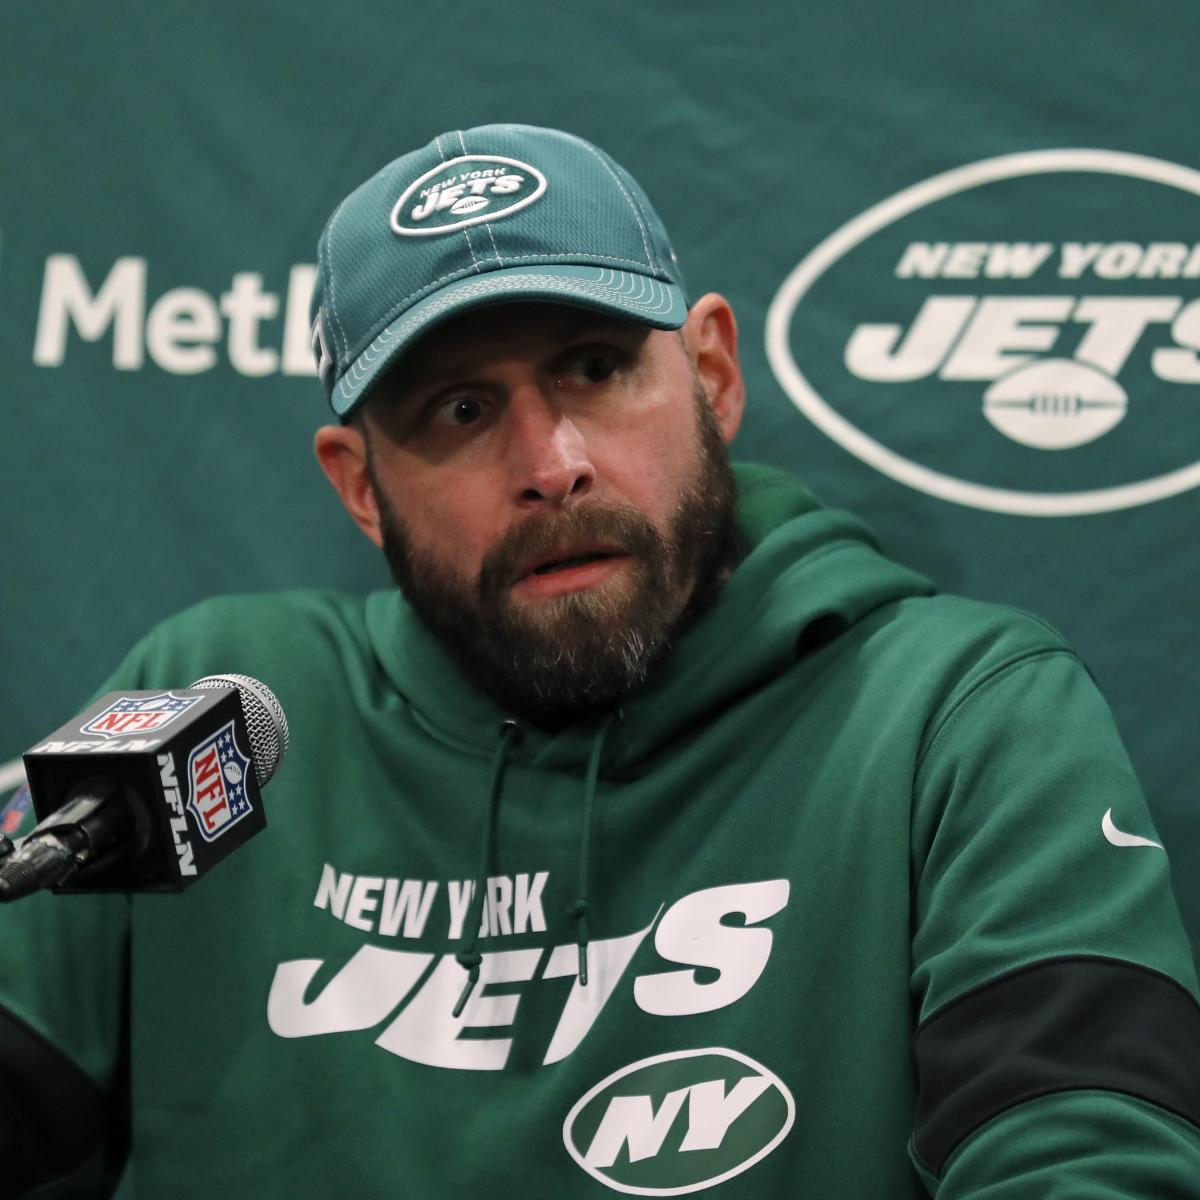 https://celebritycontent.com/2020/07/25/jamal-adams-adam-gase-not-the-right-leader-to-bring-jets-super-bowl-title/